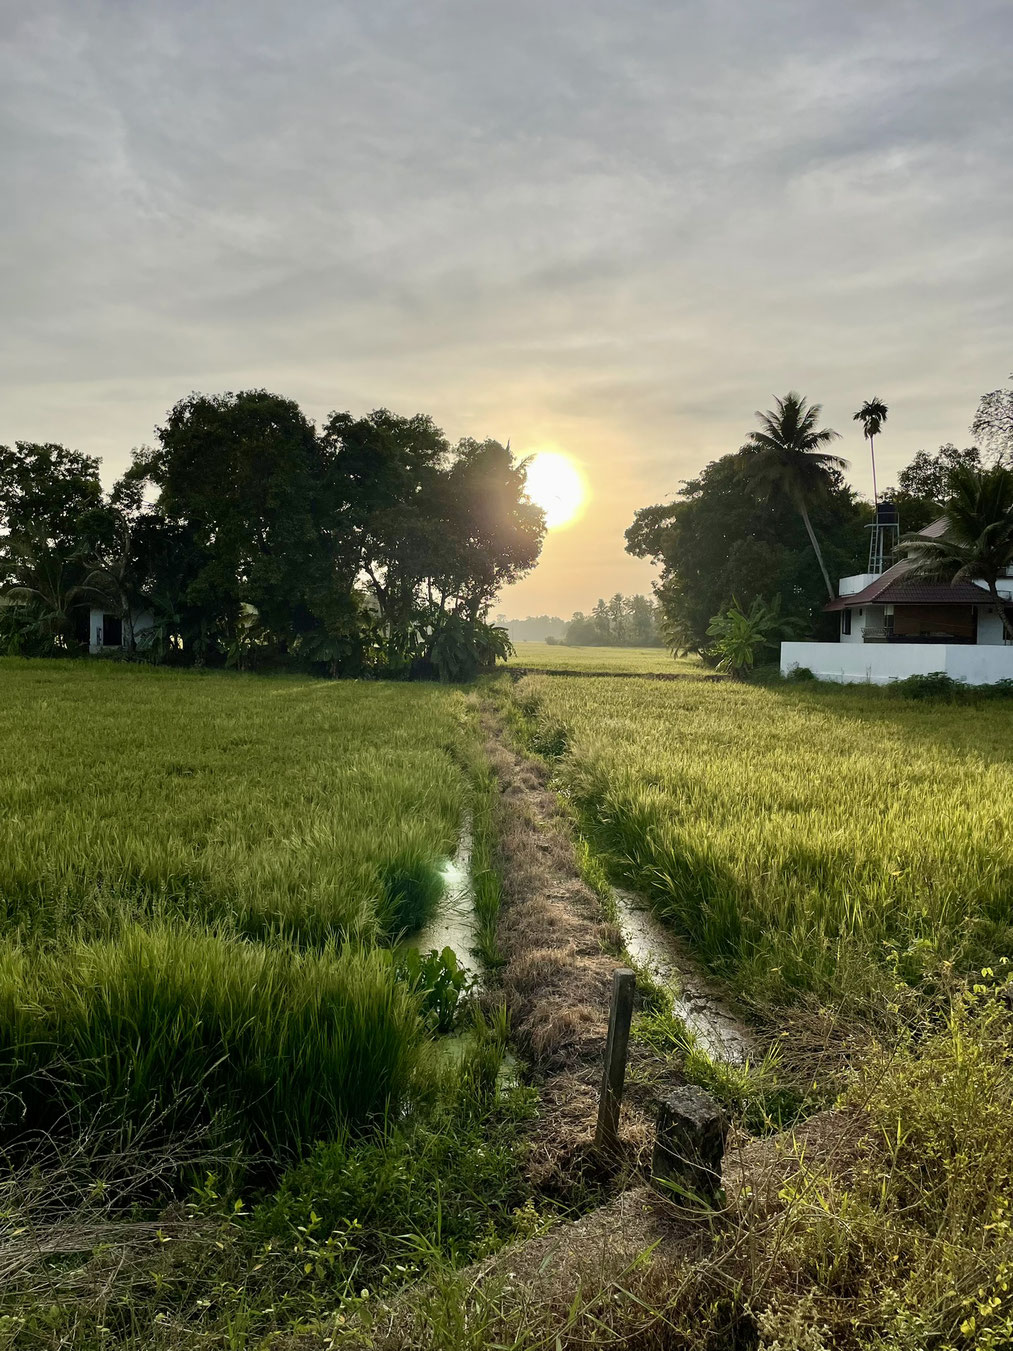 "The area around Alappuzha is surrounded by paddy fields as far as the eye can see"